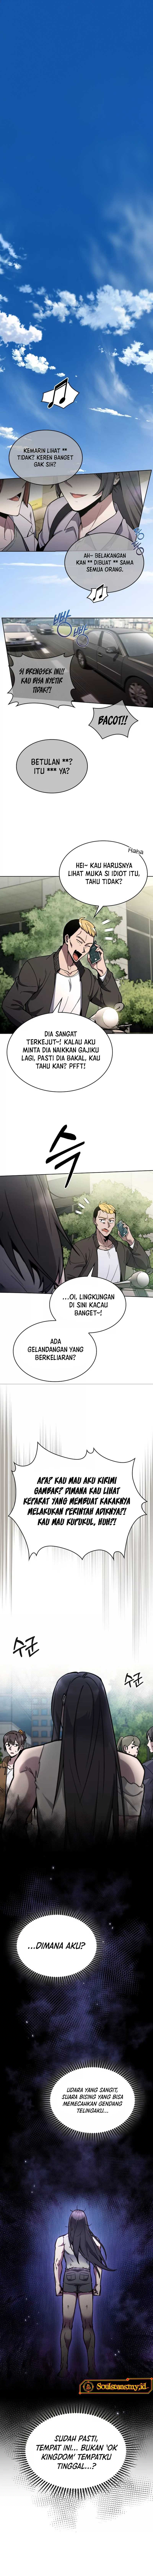 The Delivery Man From Murim Chapter 01